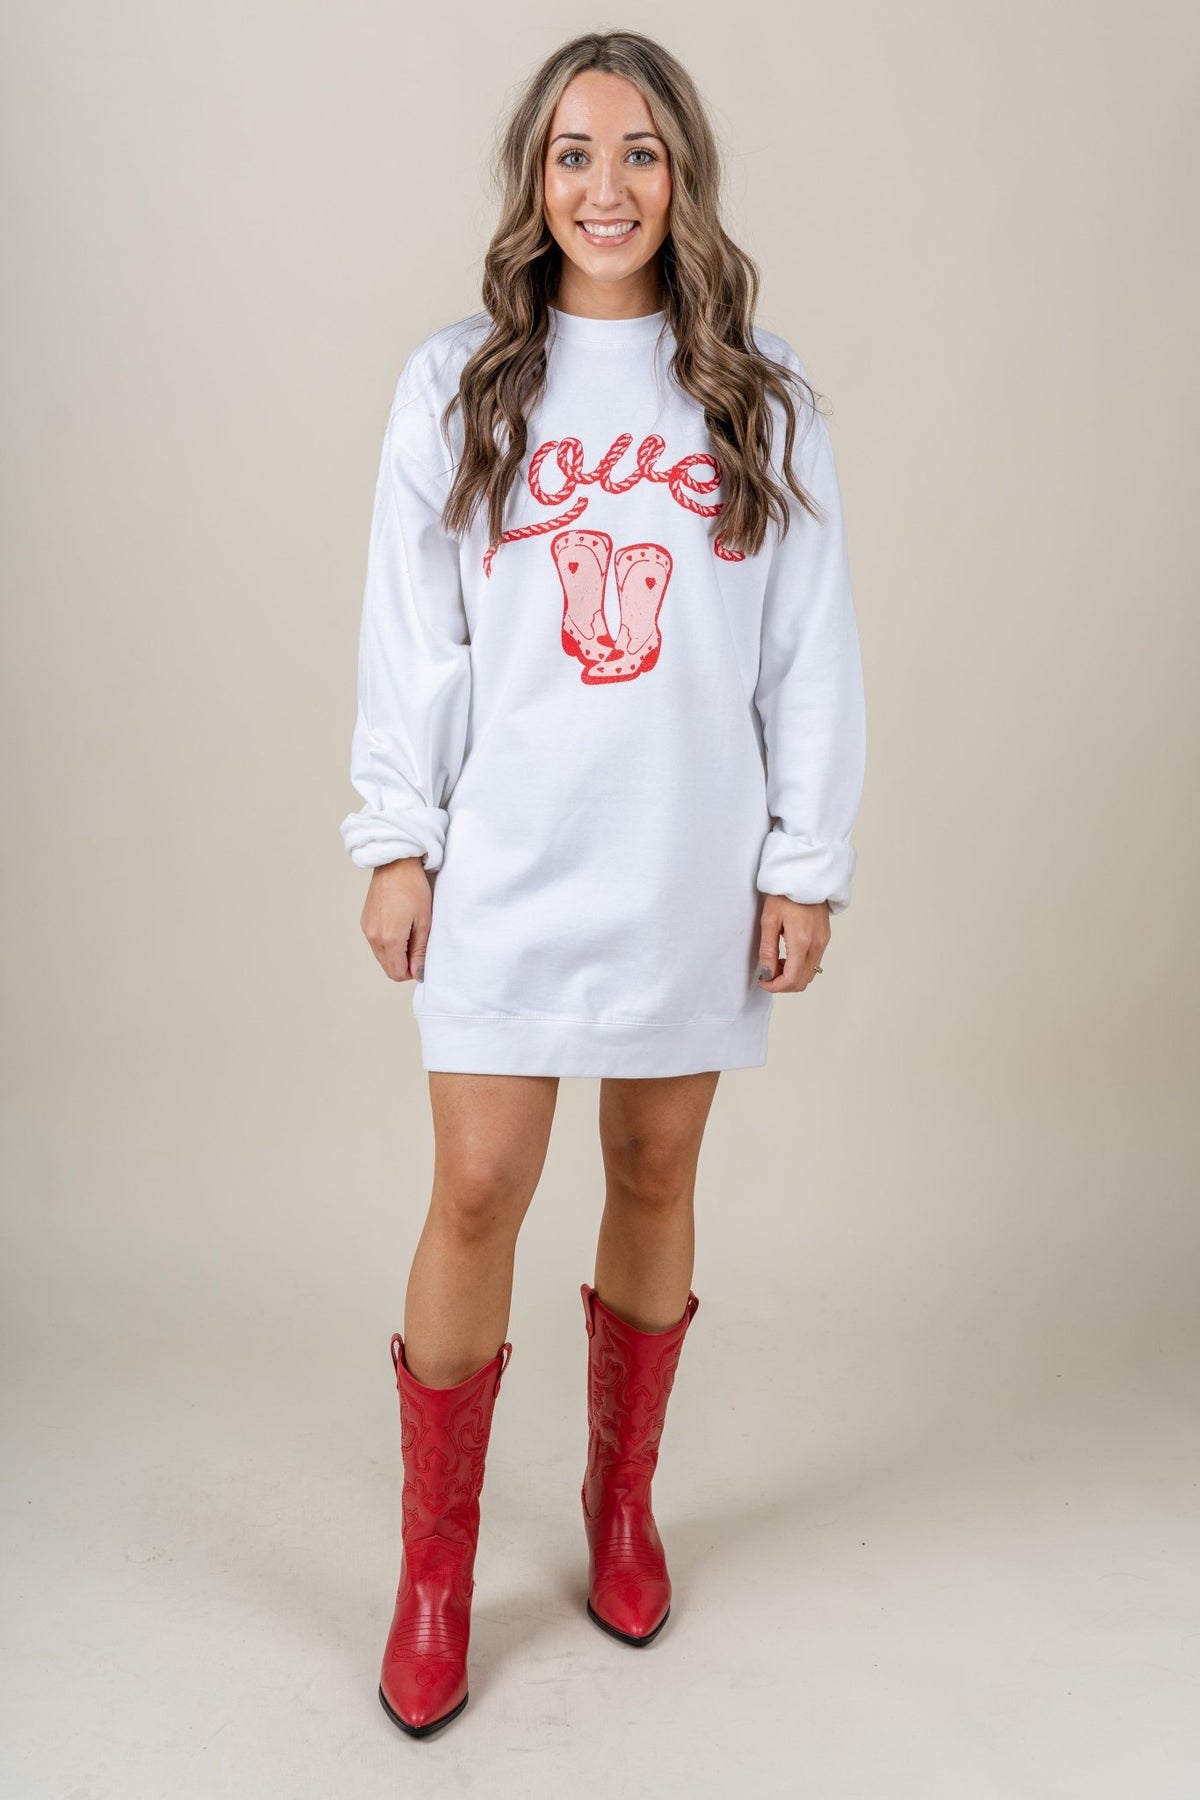 Lover boot sweatshirt dress white - Trendy T-Shirts for Valentine's Day at Lush Fashion Lounge Boutique in Oklahoma City